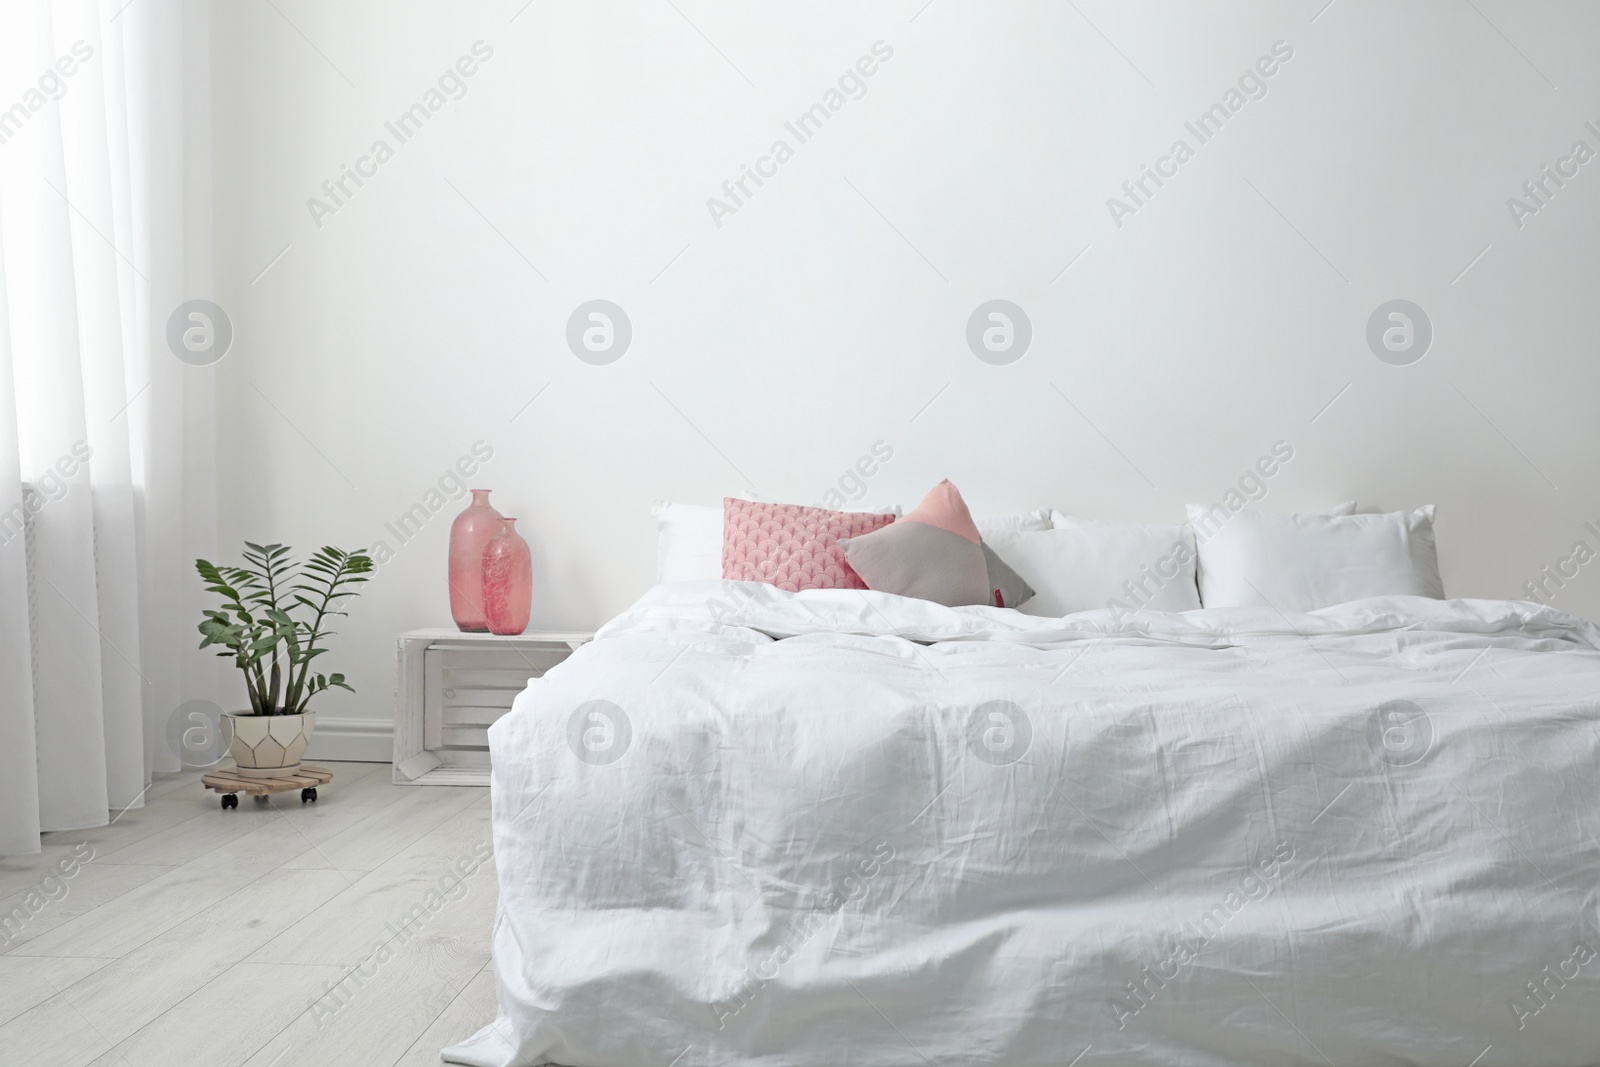 Photo of Comfortable bed with soft pillows in room interior